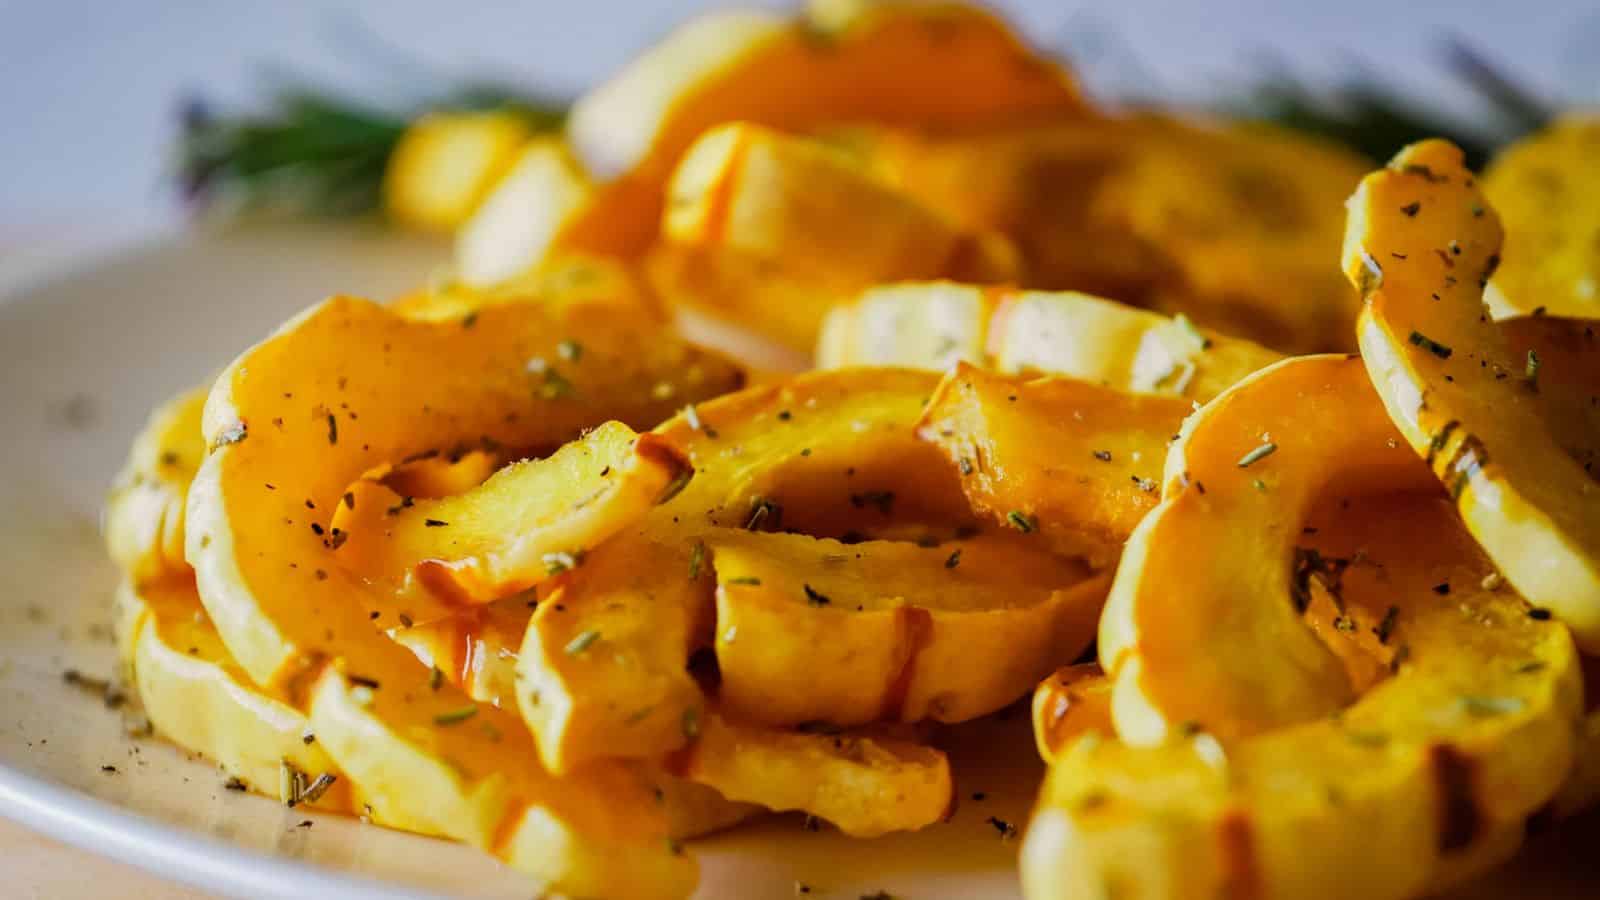 Roasted squash slices on a plate with rosemary sprigs.